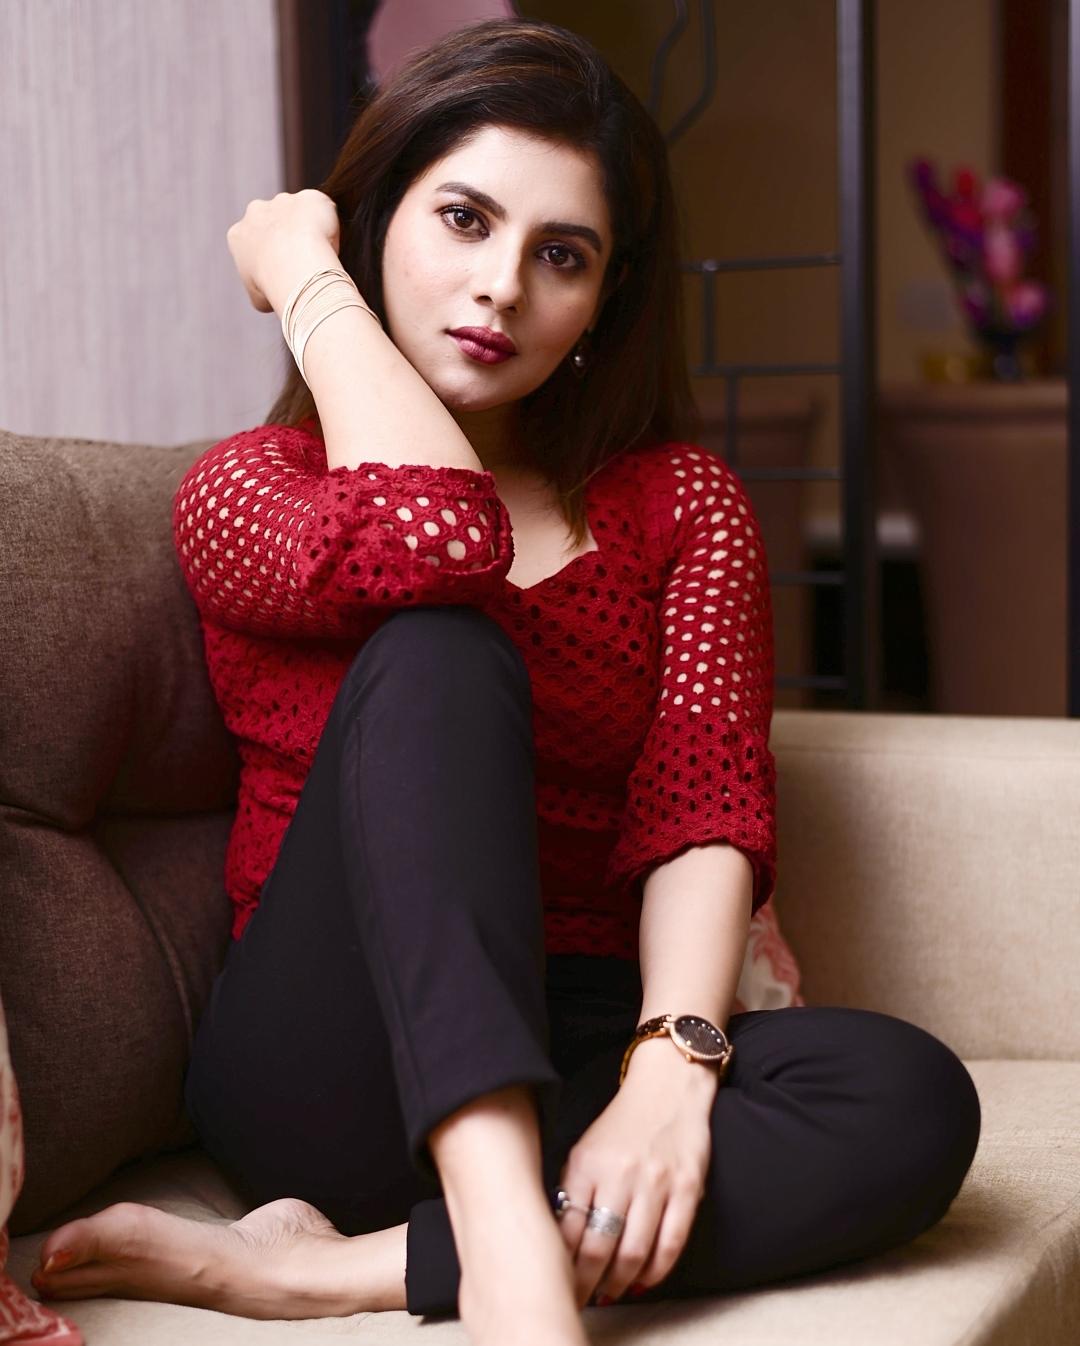 Bengali actress Payel Sarkar latest hot and spicy photos | Payel Sarkar  latest sexy photoshoot Photos: HD Images, Pictures, Stills, First Look  Posters of Bengali actress Payel Sarkar latest hot and spicy